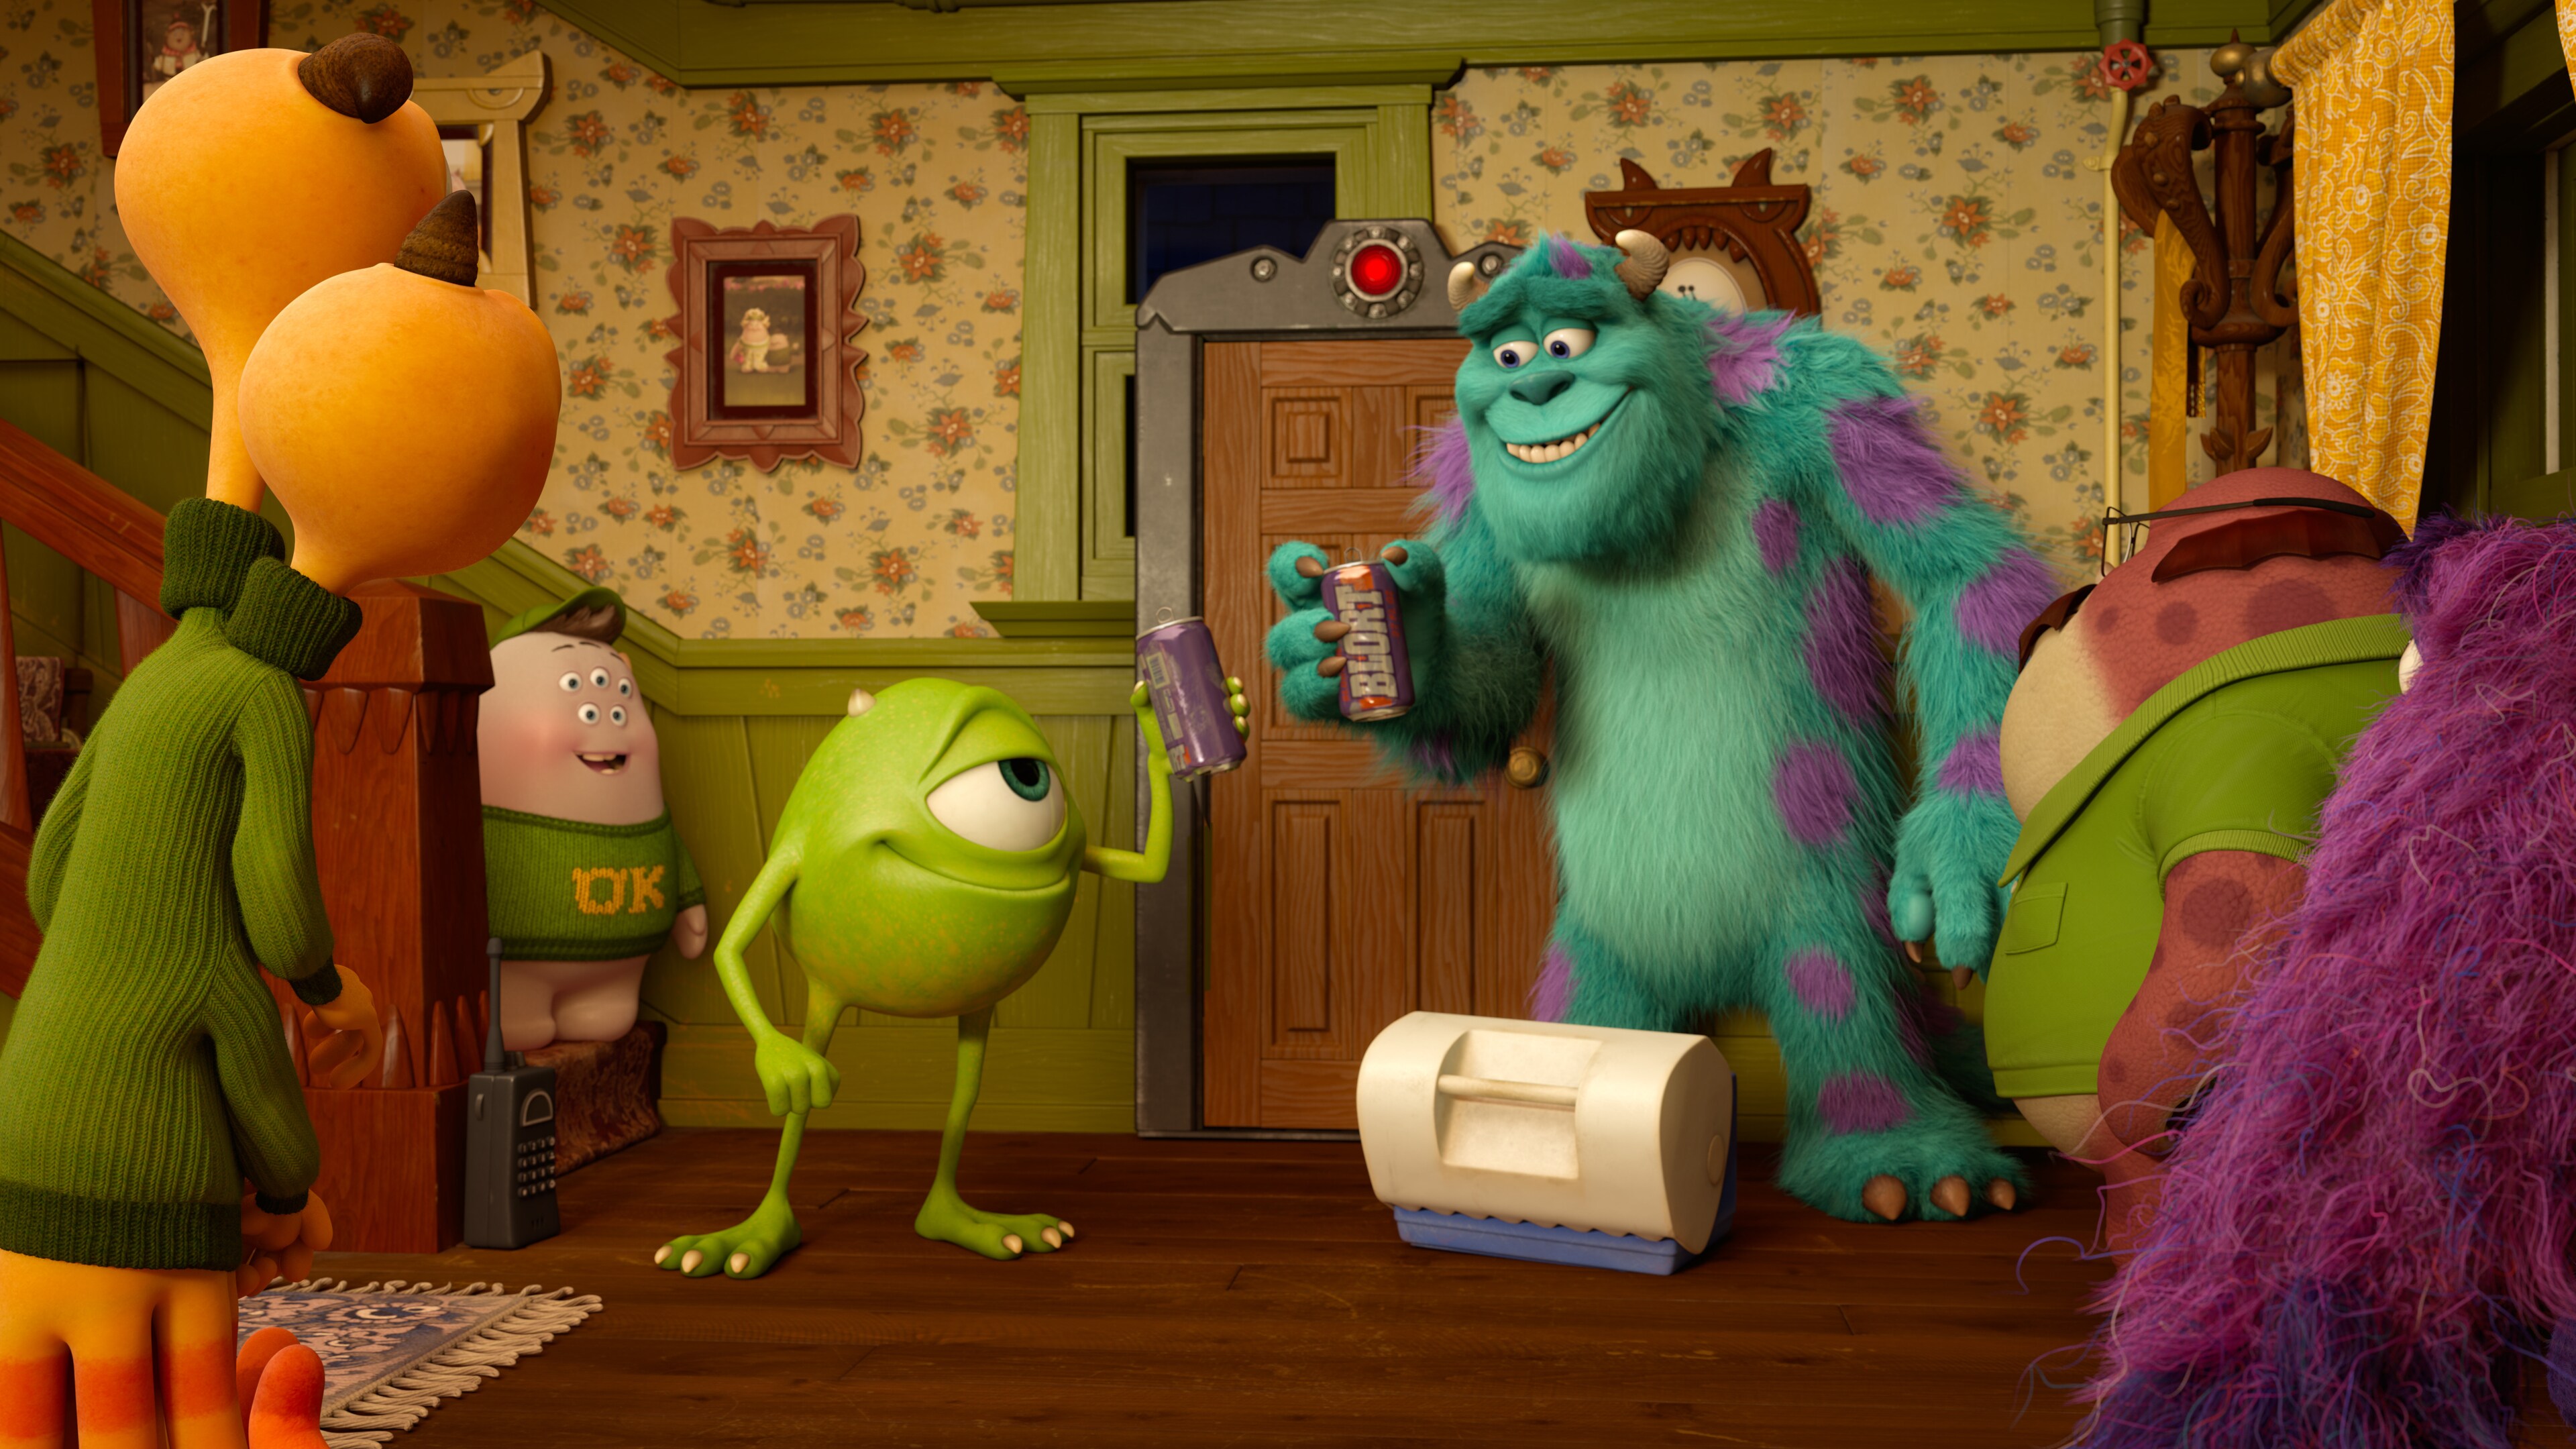 Mike (voiced by Billy Crystal) and Sully (voiced by John Goodman) in the Disney•Pixar movie Party Central.